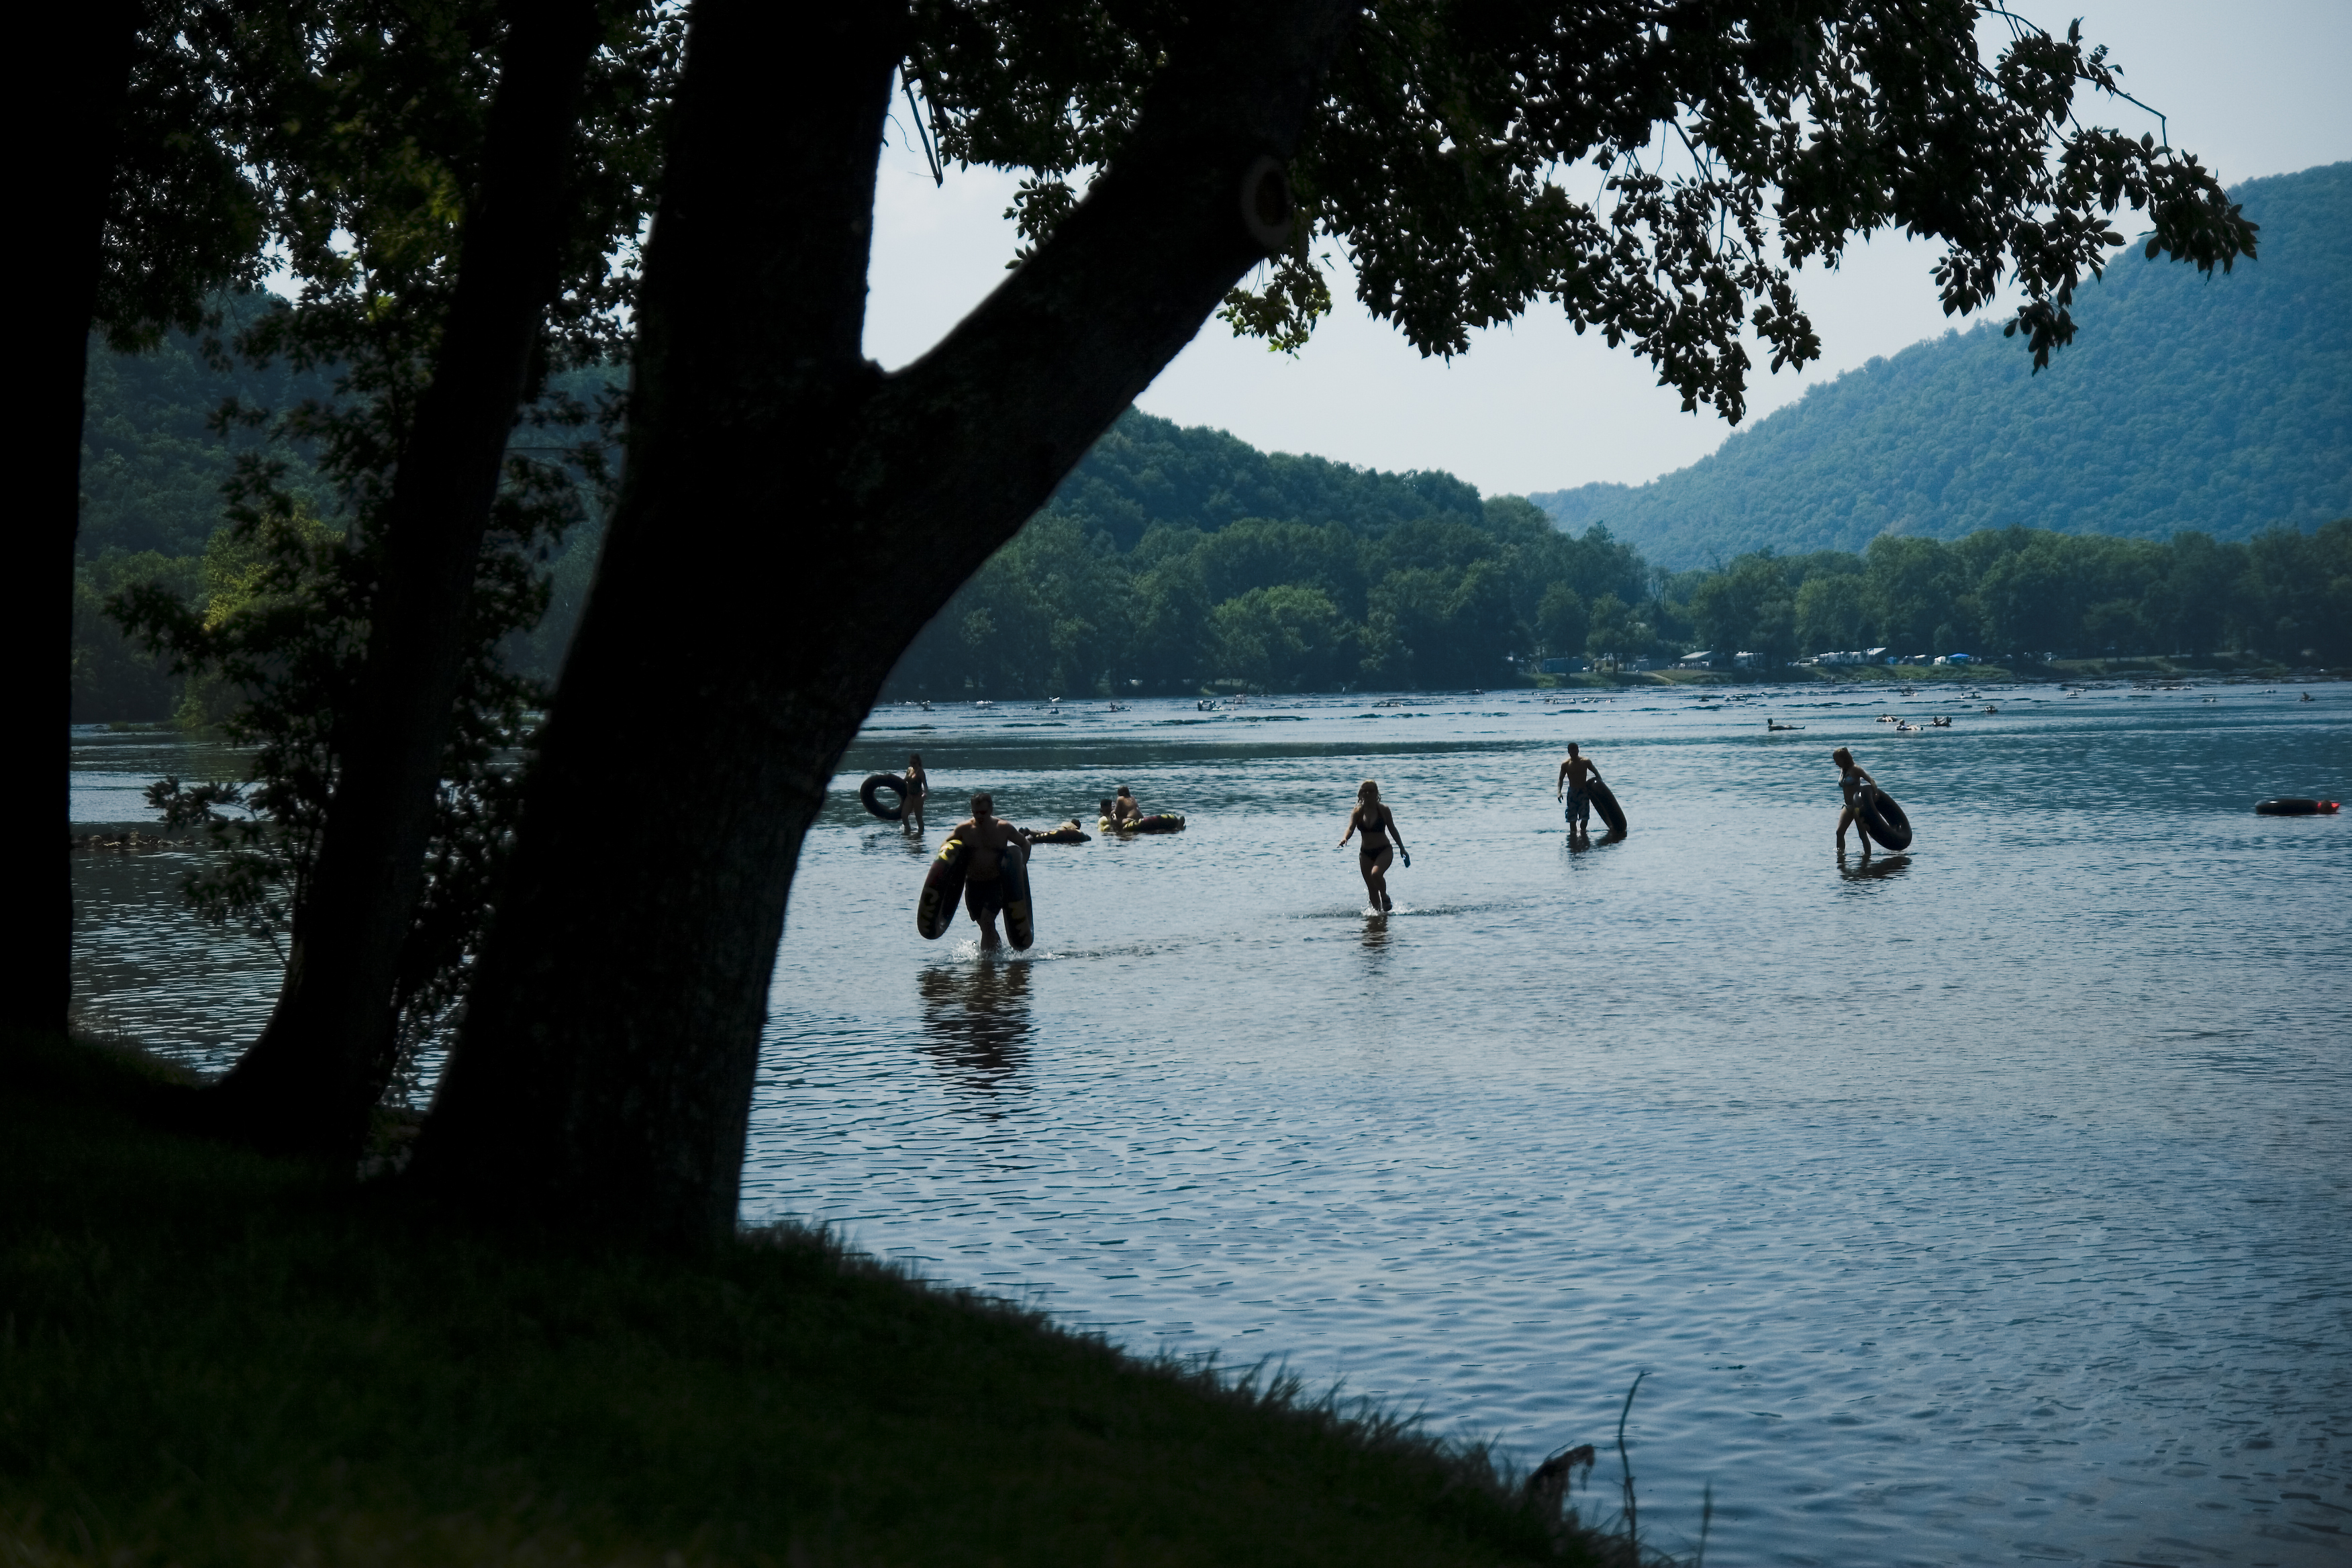 Tubing is one of the many activities that students enjoy during the warm months in Blacksburg.